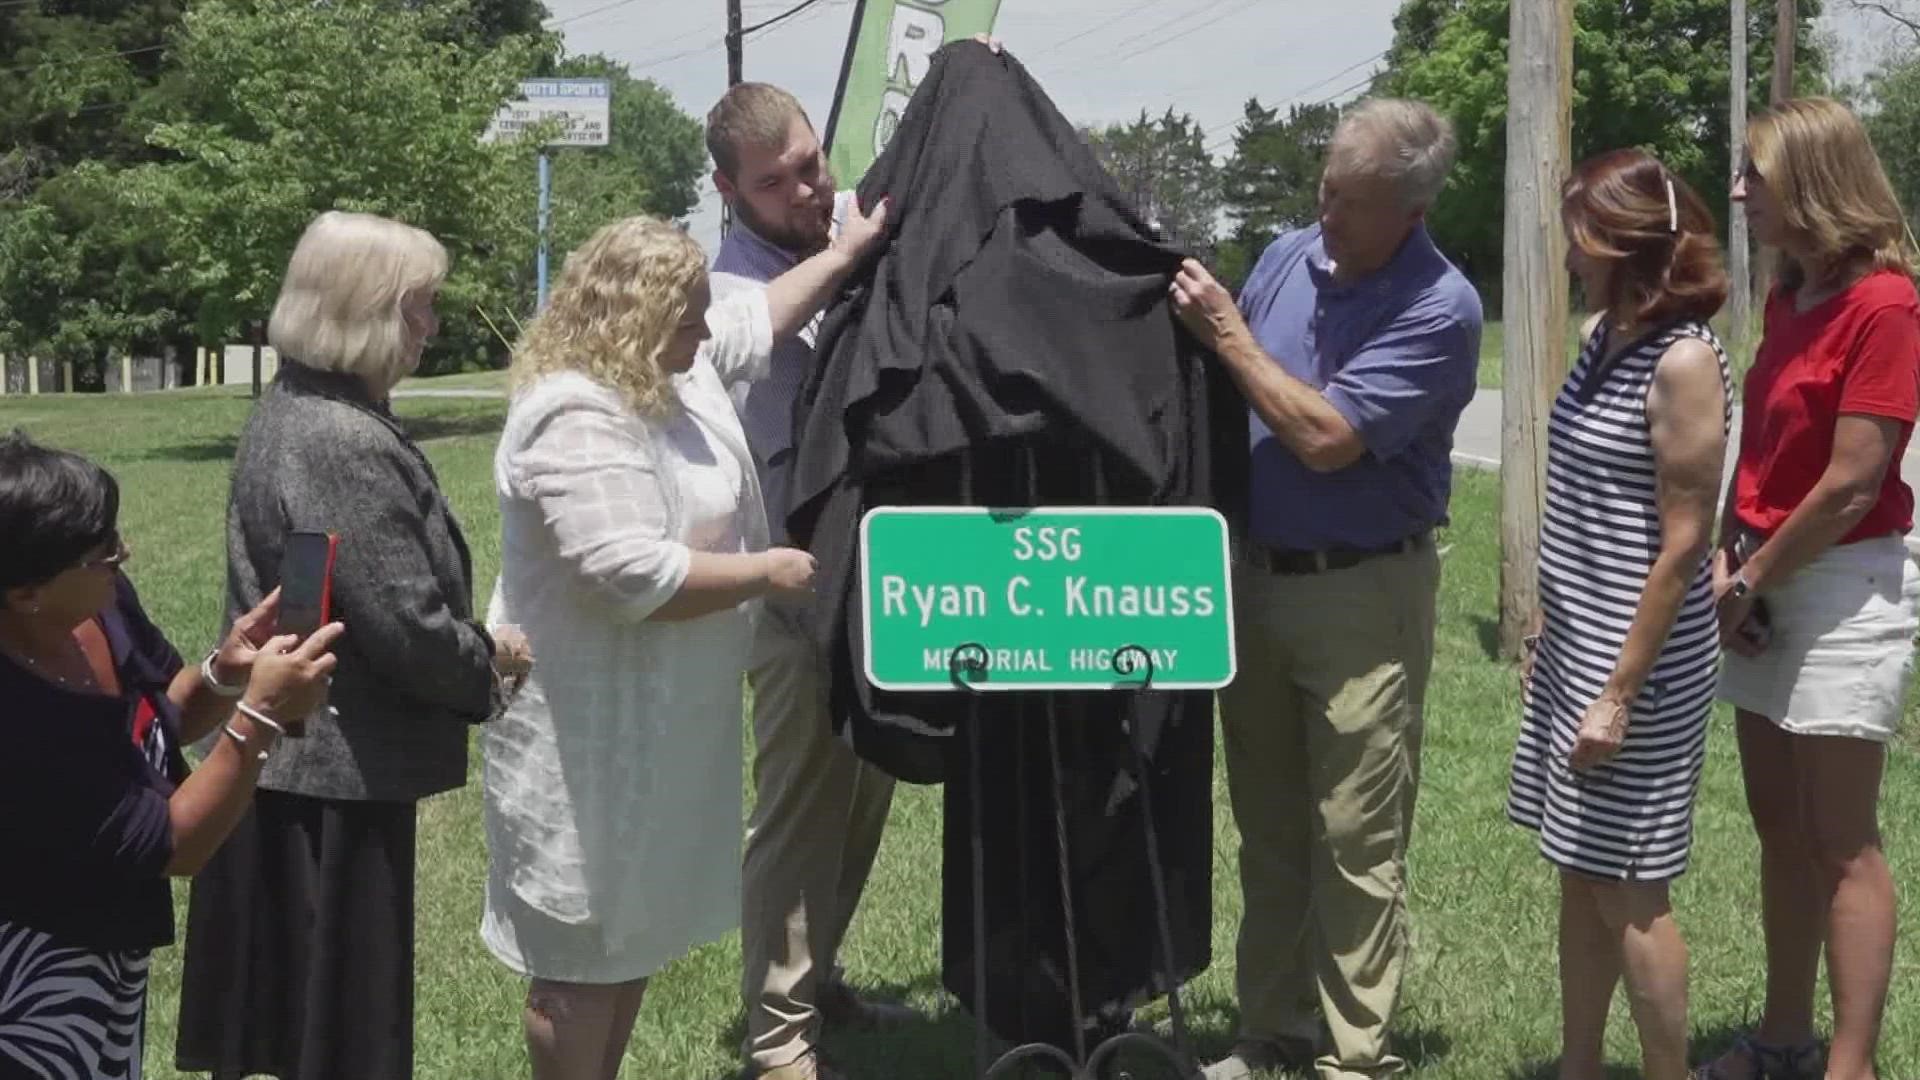 Part of Tazewell Pike and Emory Road in Corryton will now be known as the Ryan C. Knauss Memorial Highway.